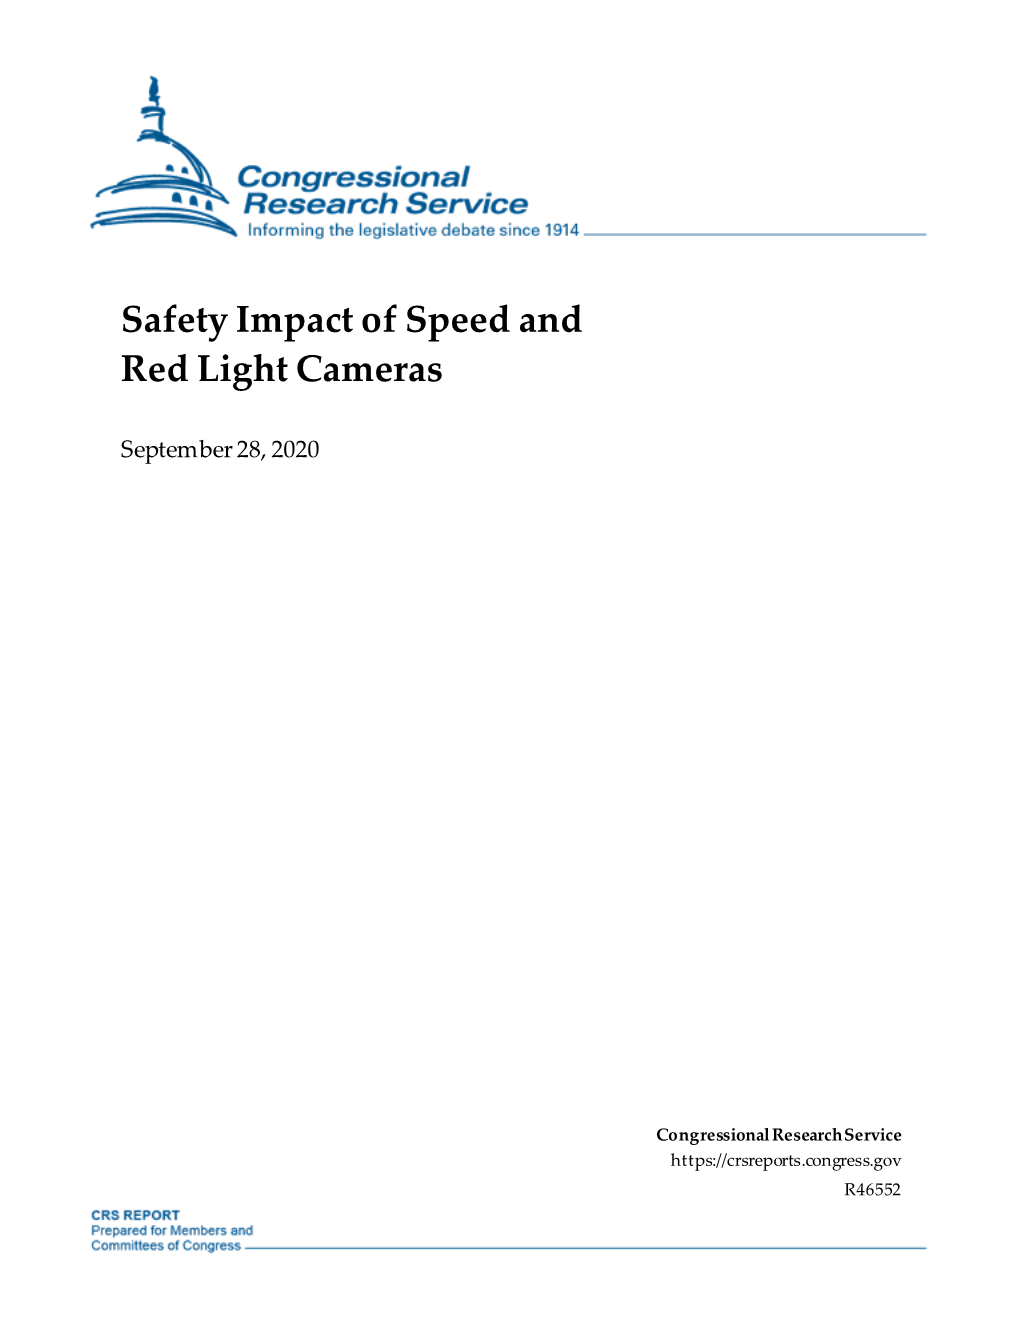 Safety Impact of Speed and Red Light Cameras